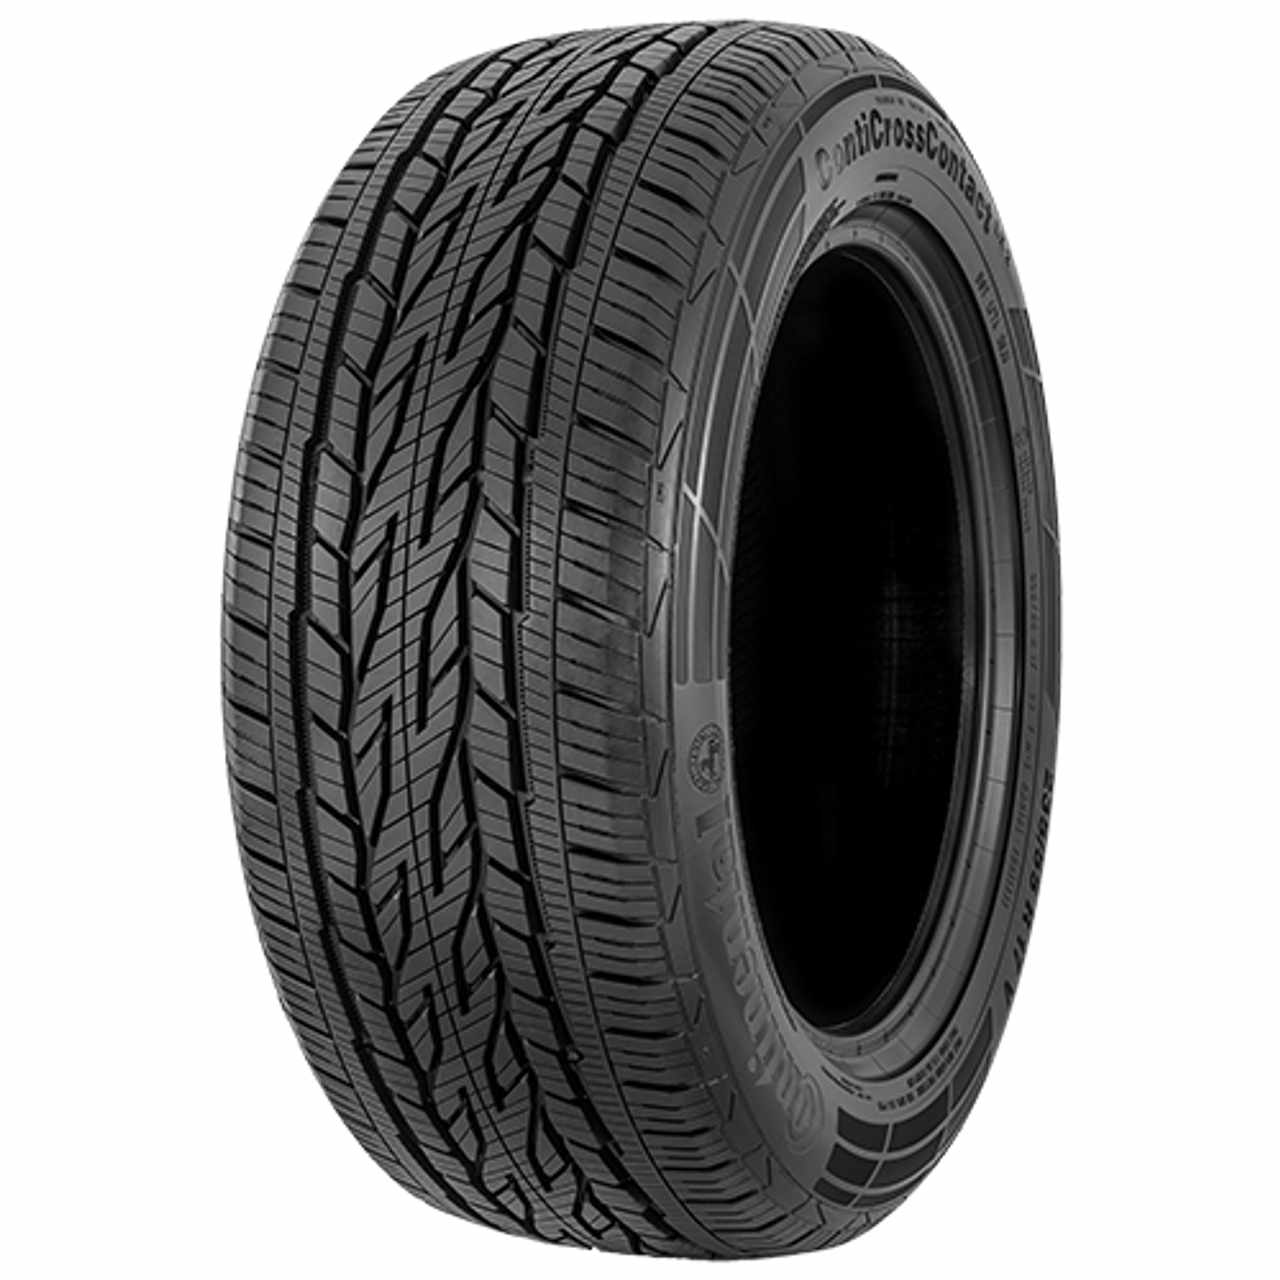 CONTINENTAL CONTICROSSCONTACT LX 2 225/70R15 100T FR BSW